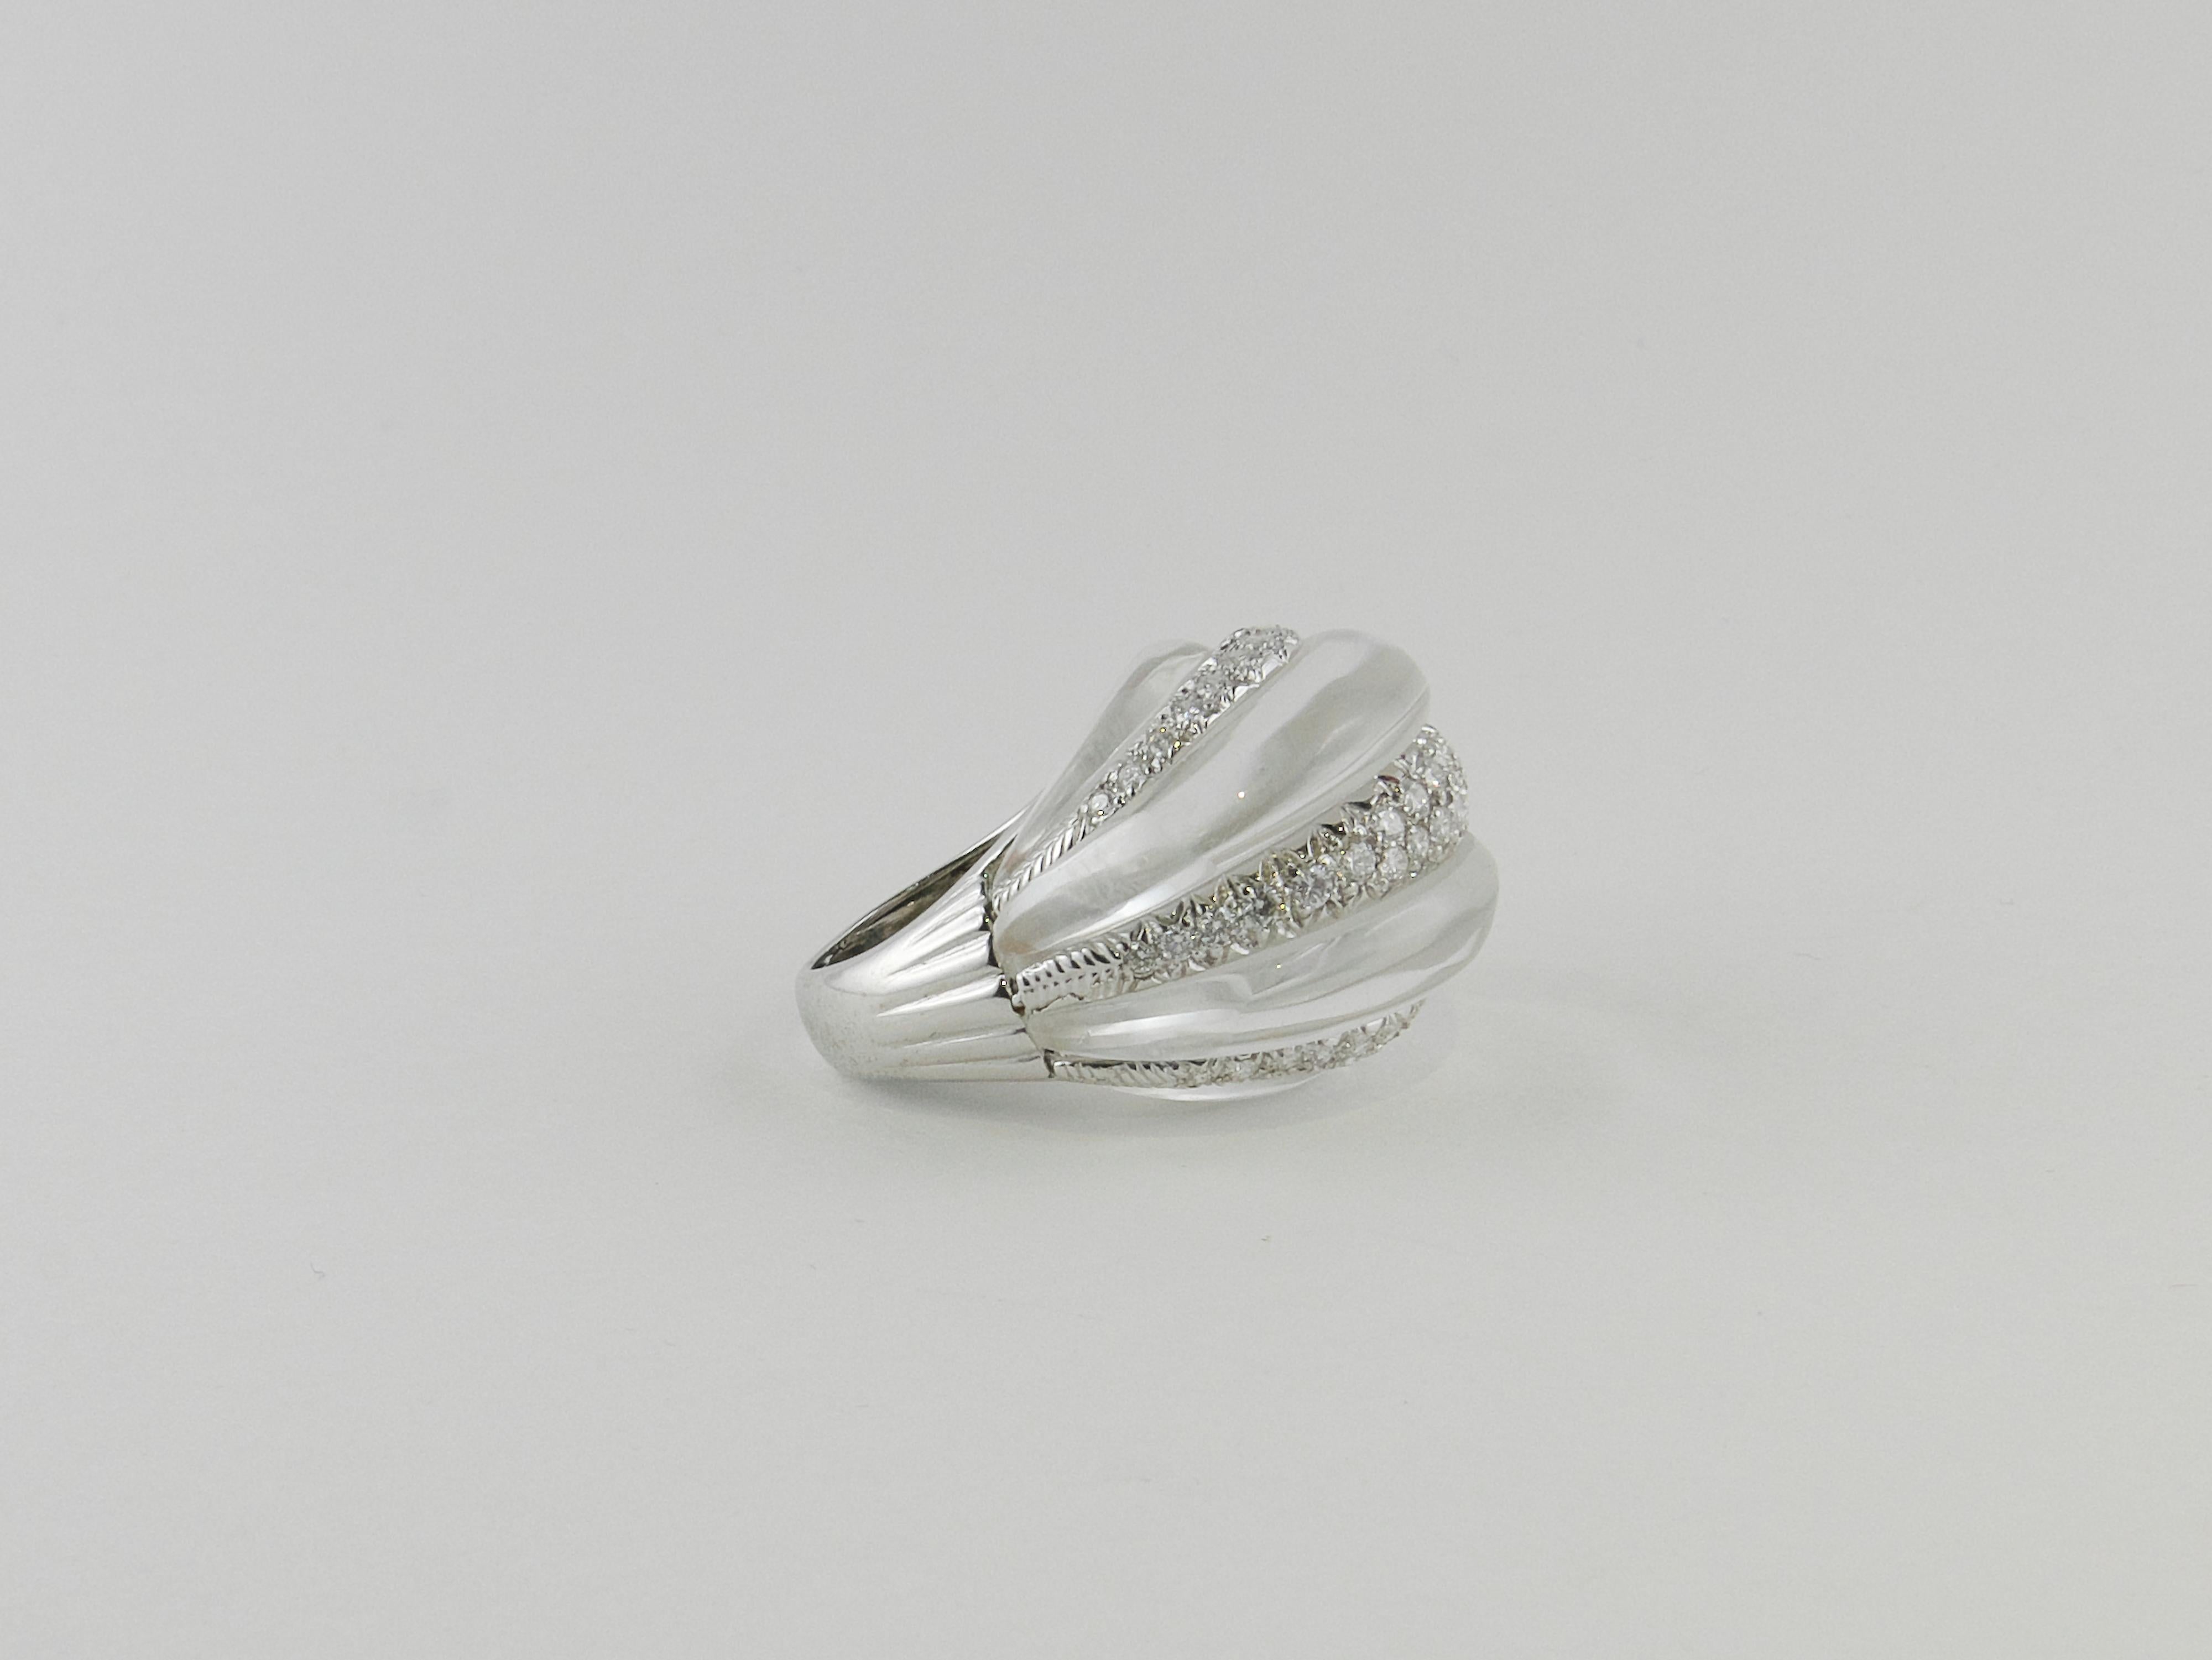 An extremely chic and opulent  fluted Rock Crystal, and brilliant-cut Diamonds dome Ring signed David Webb.
Crafted in the 1970s with uncompromising attention to detail, and  with the finest materials, this distintive and imposing cocktail Ring